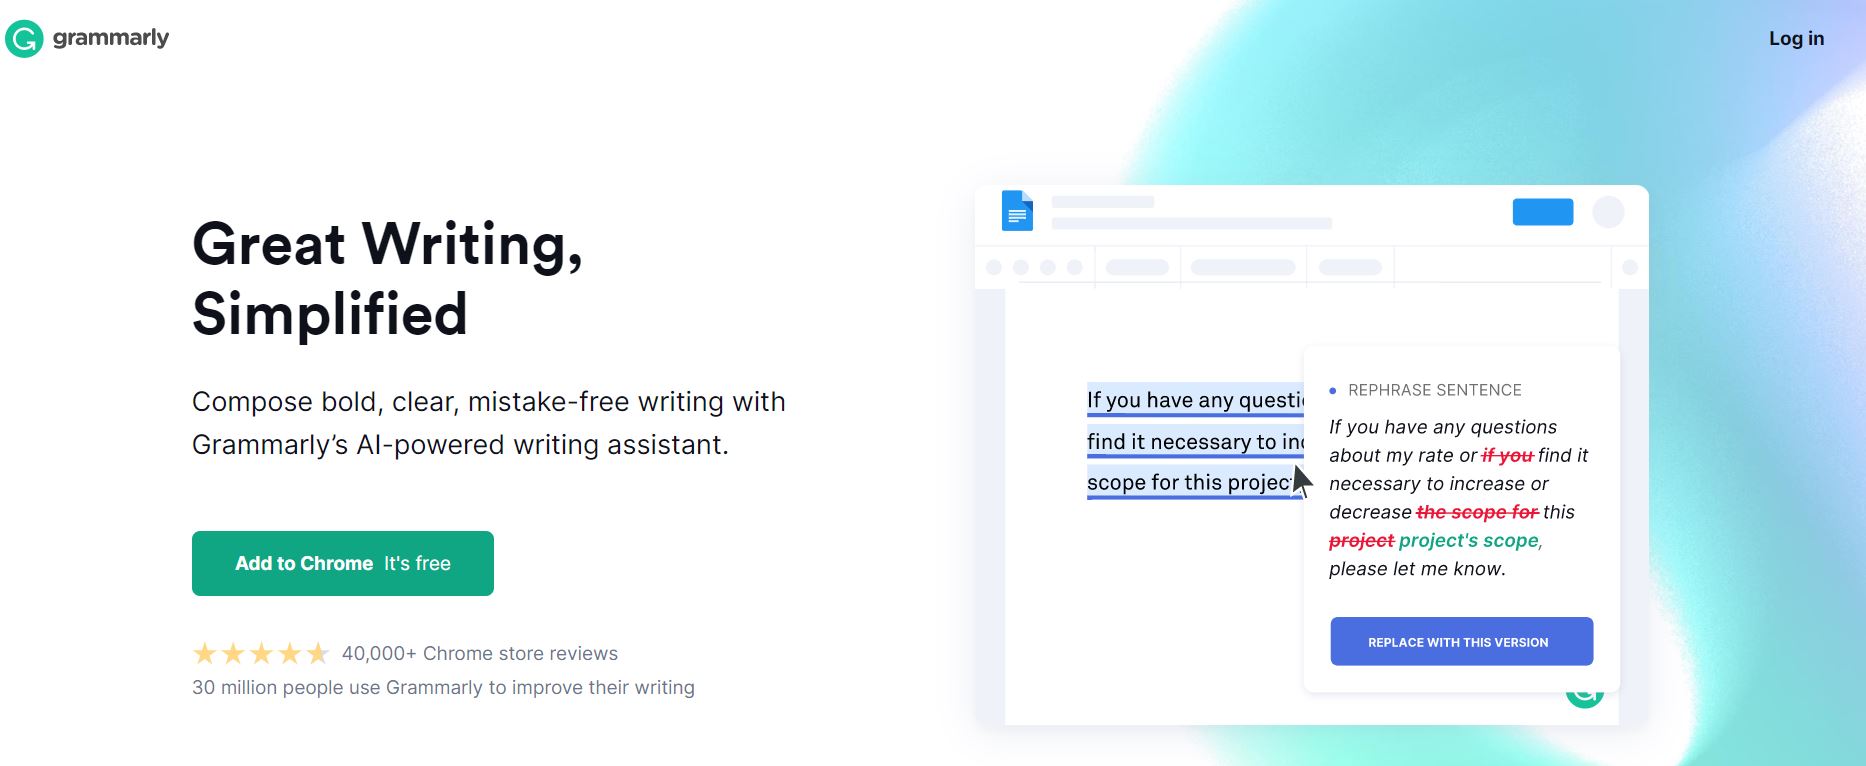 Grammarly Review 2021: Pros, Cons, and Best Features for Writing